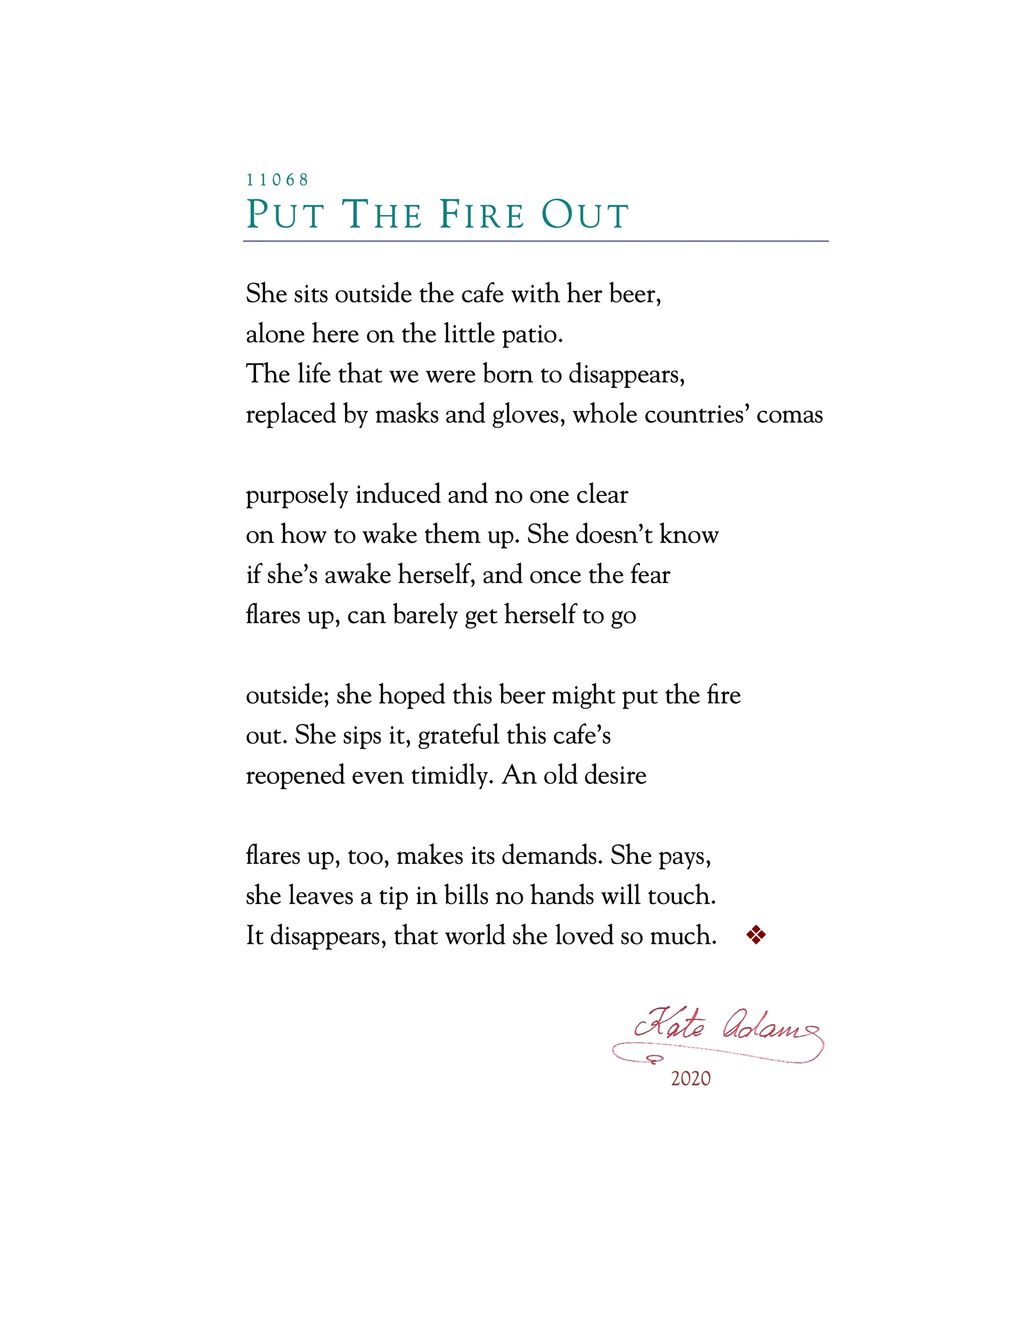 PDF of poem "Put The Fire Out"

Beer, masks and gloves, comas